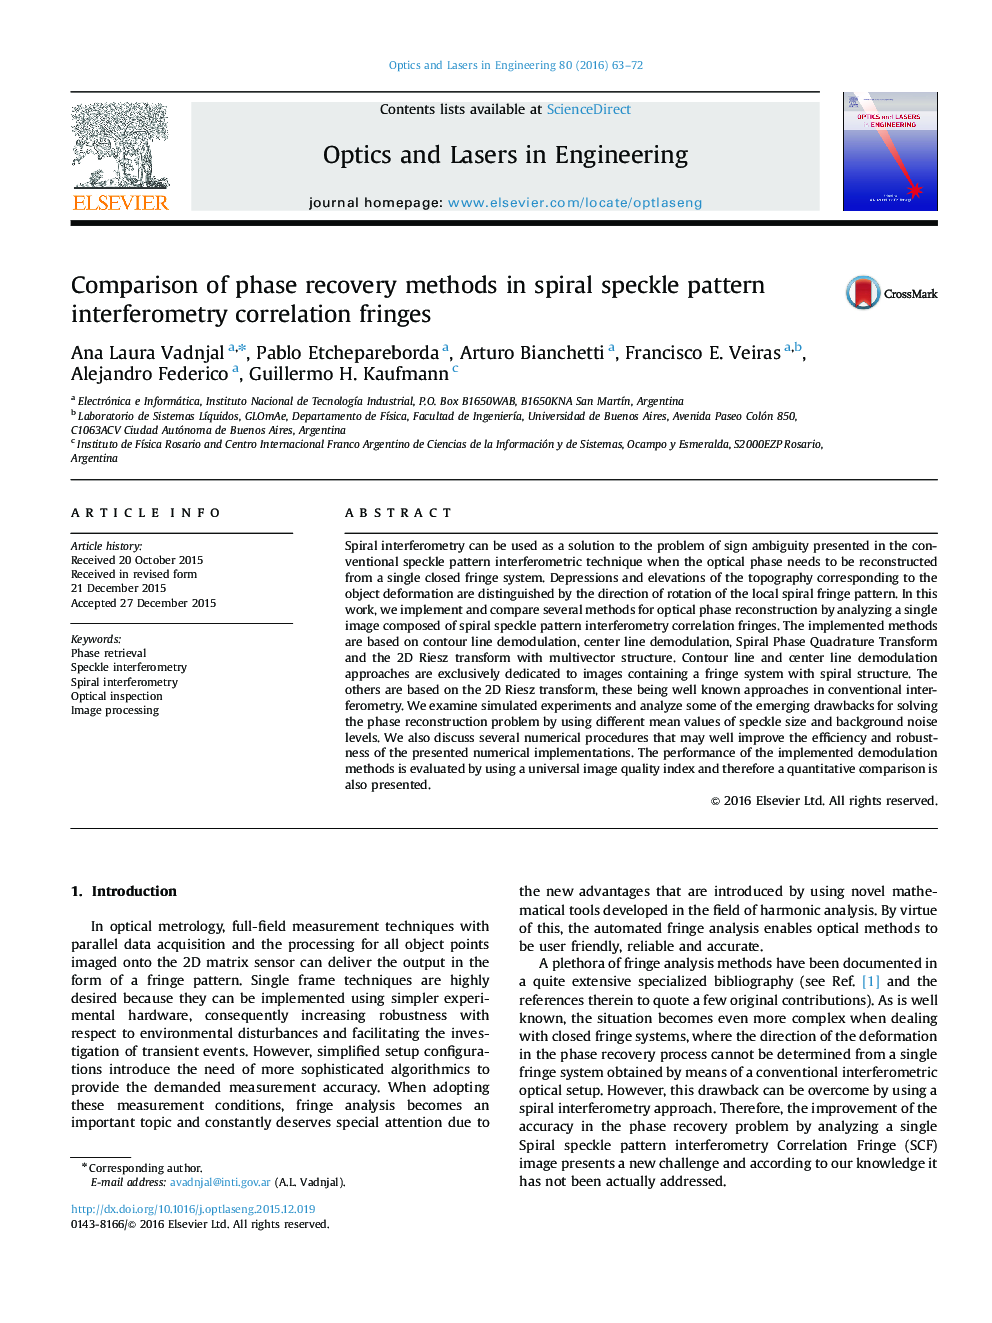 Comparison of phase recovery methods in spiral speckle pattern interferometry correlation fringes